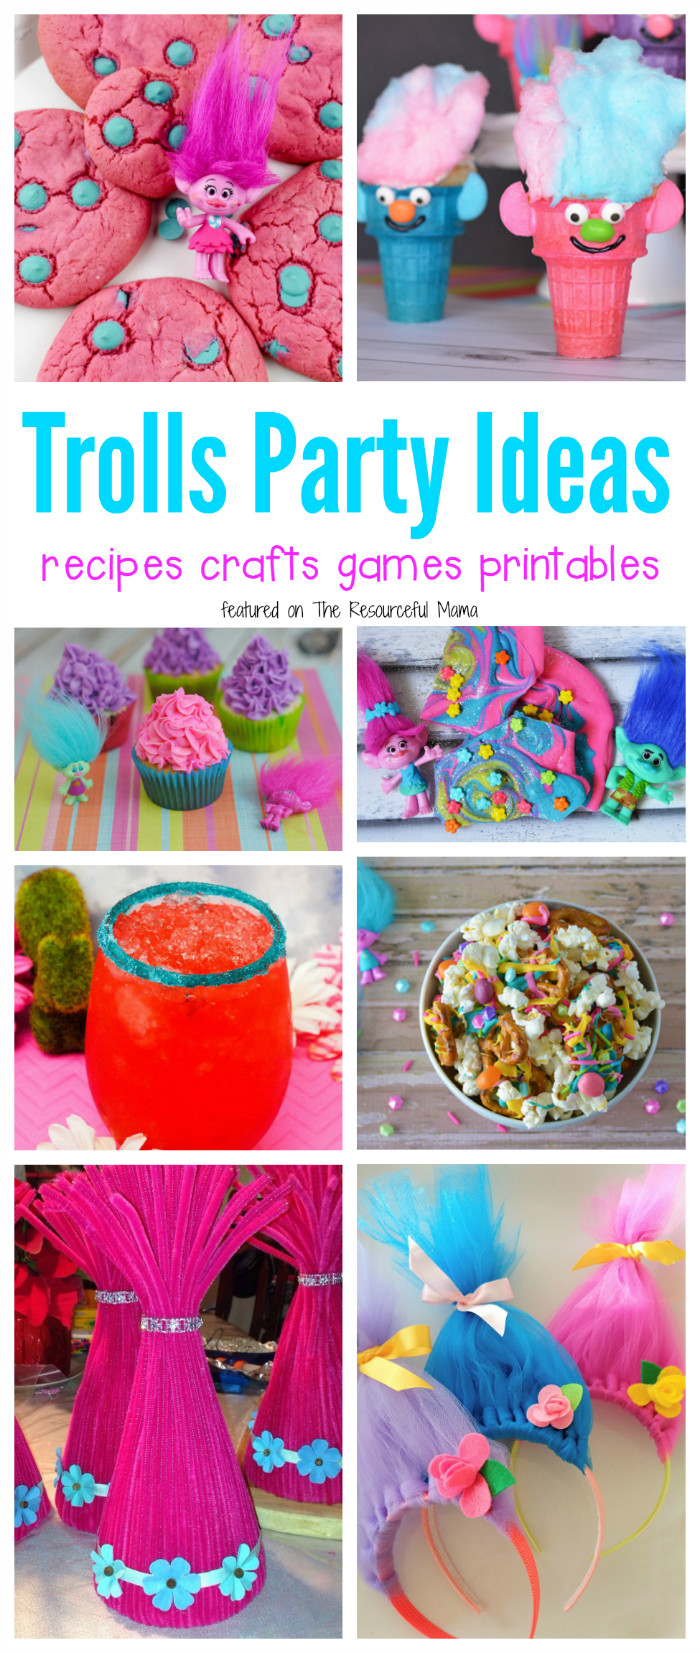 Trolls Birthday Party Ideas For Food
 Pin on The Resourceful Mama